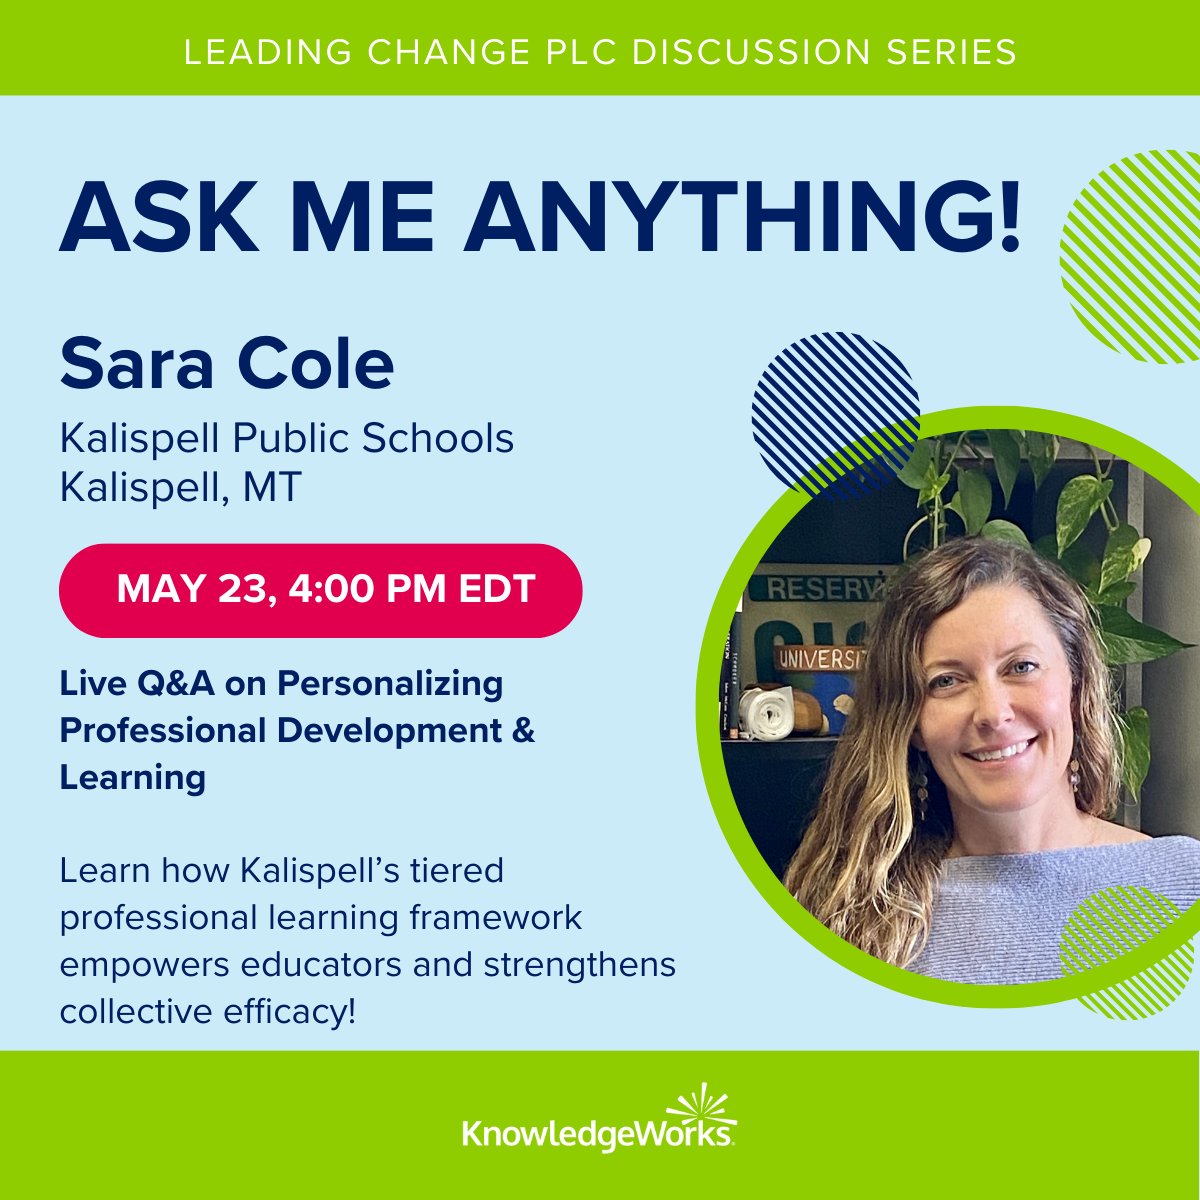 Ready for an enlightening session? Join us & #LeadingChange Community on 5/23 for a virtual #AskMeAnything with Sara Cole. Learn about crafting effective professional learning experiences for educators. Secure your spot now: ow.ly/vjwe50Rw5rH